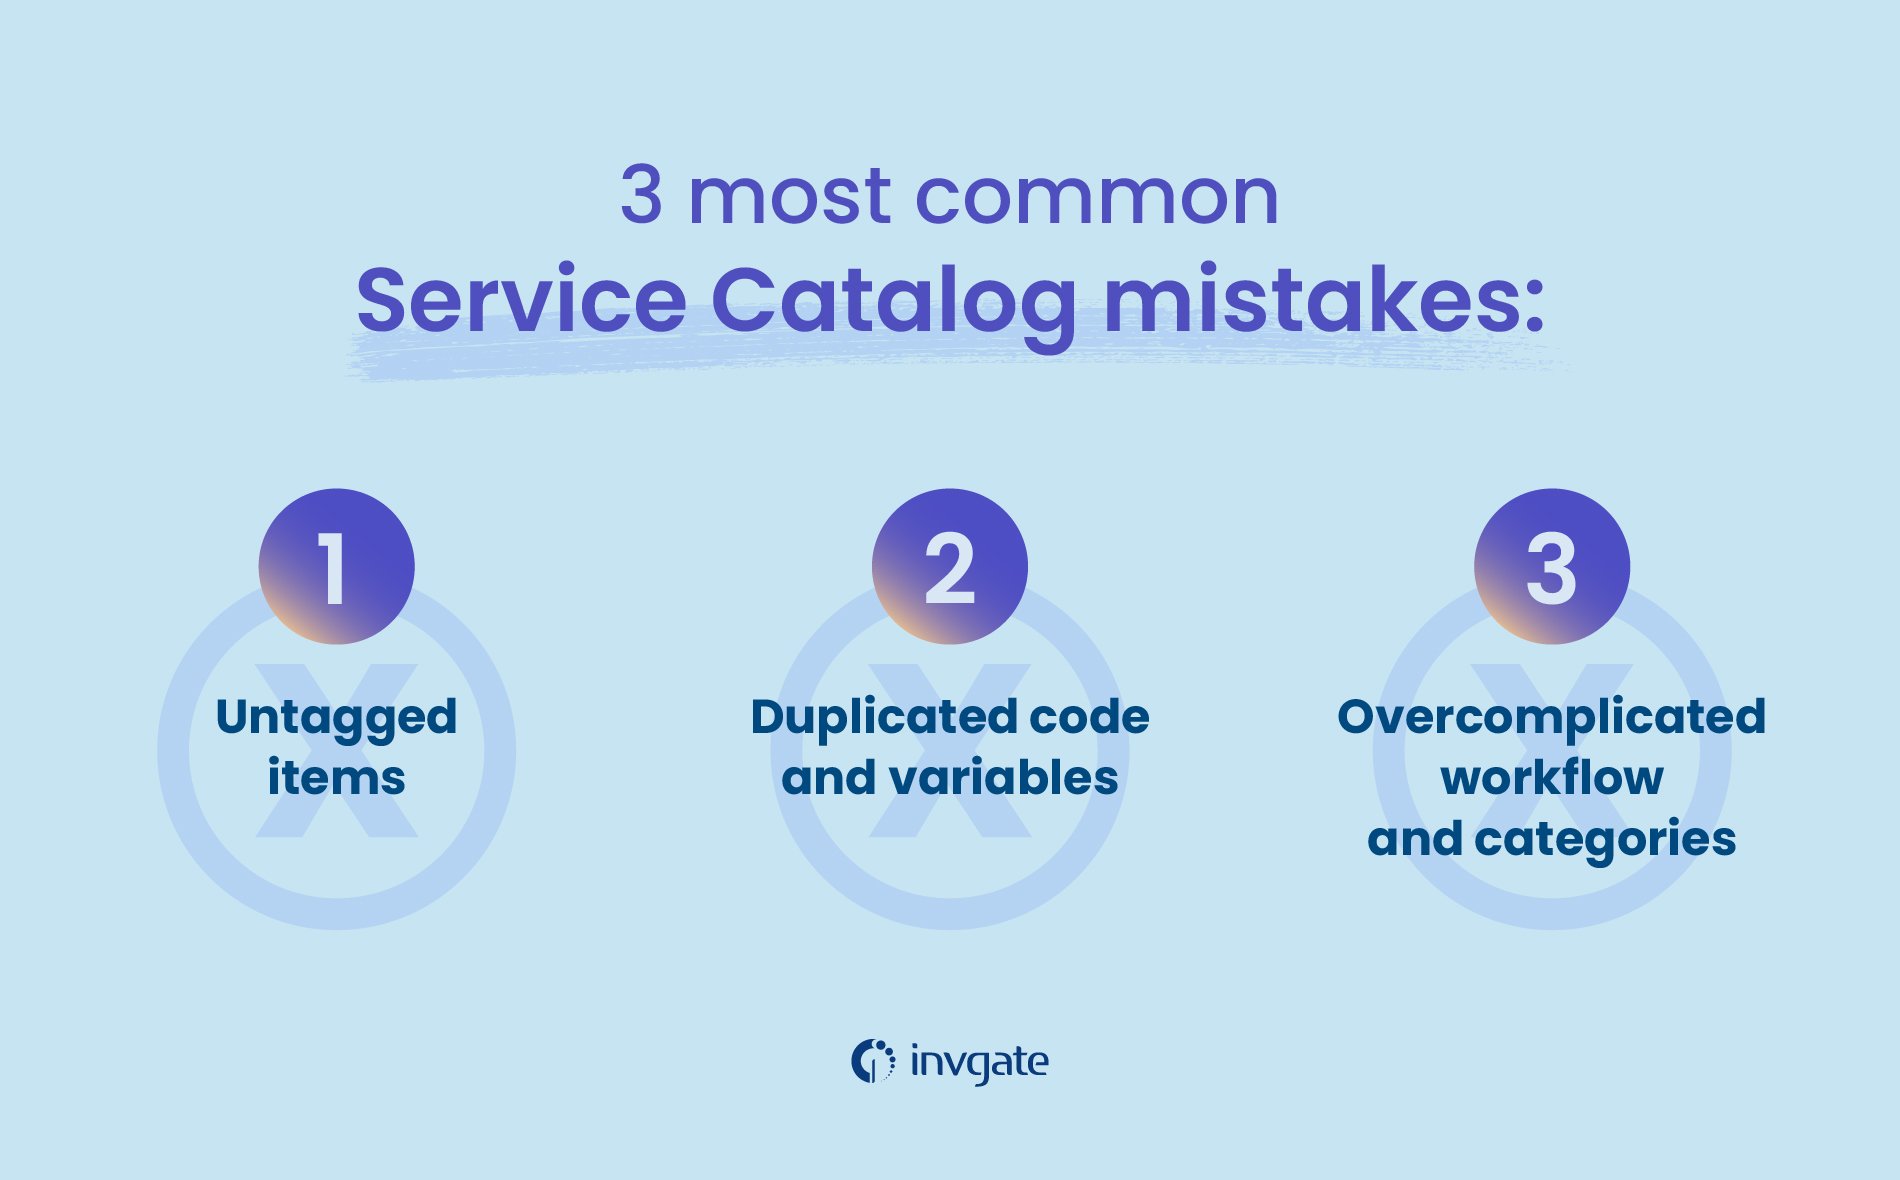 The most common service catalog mistakes